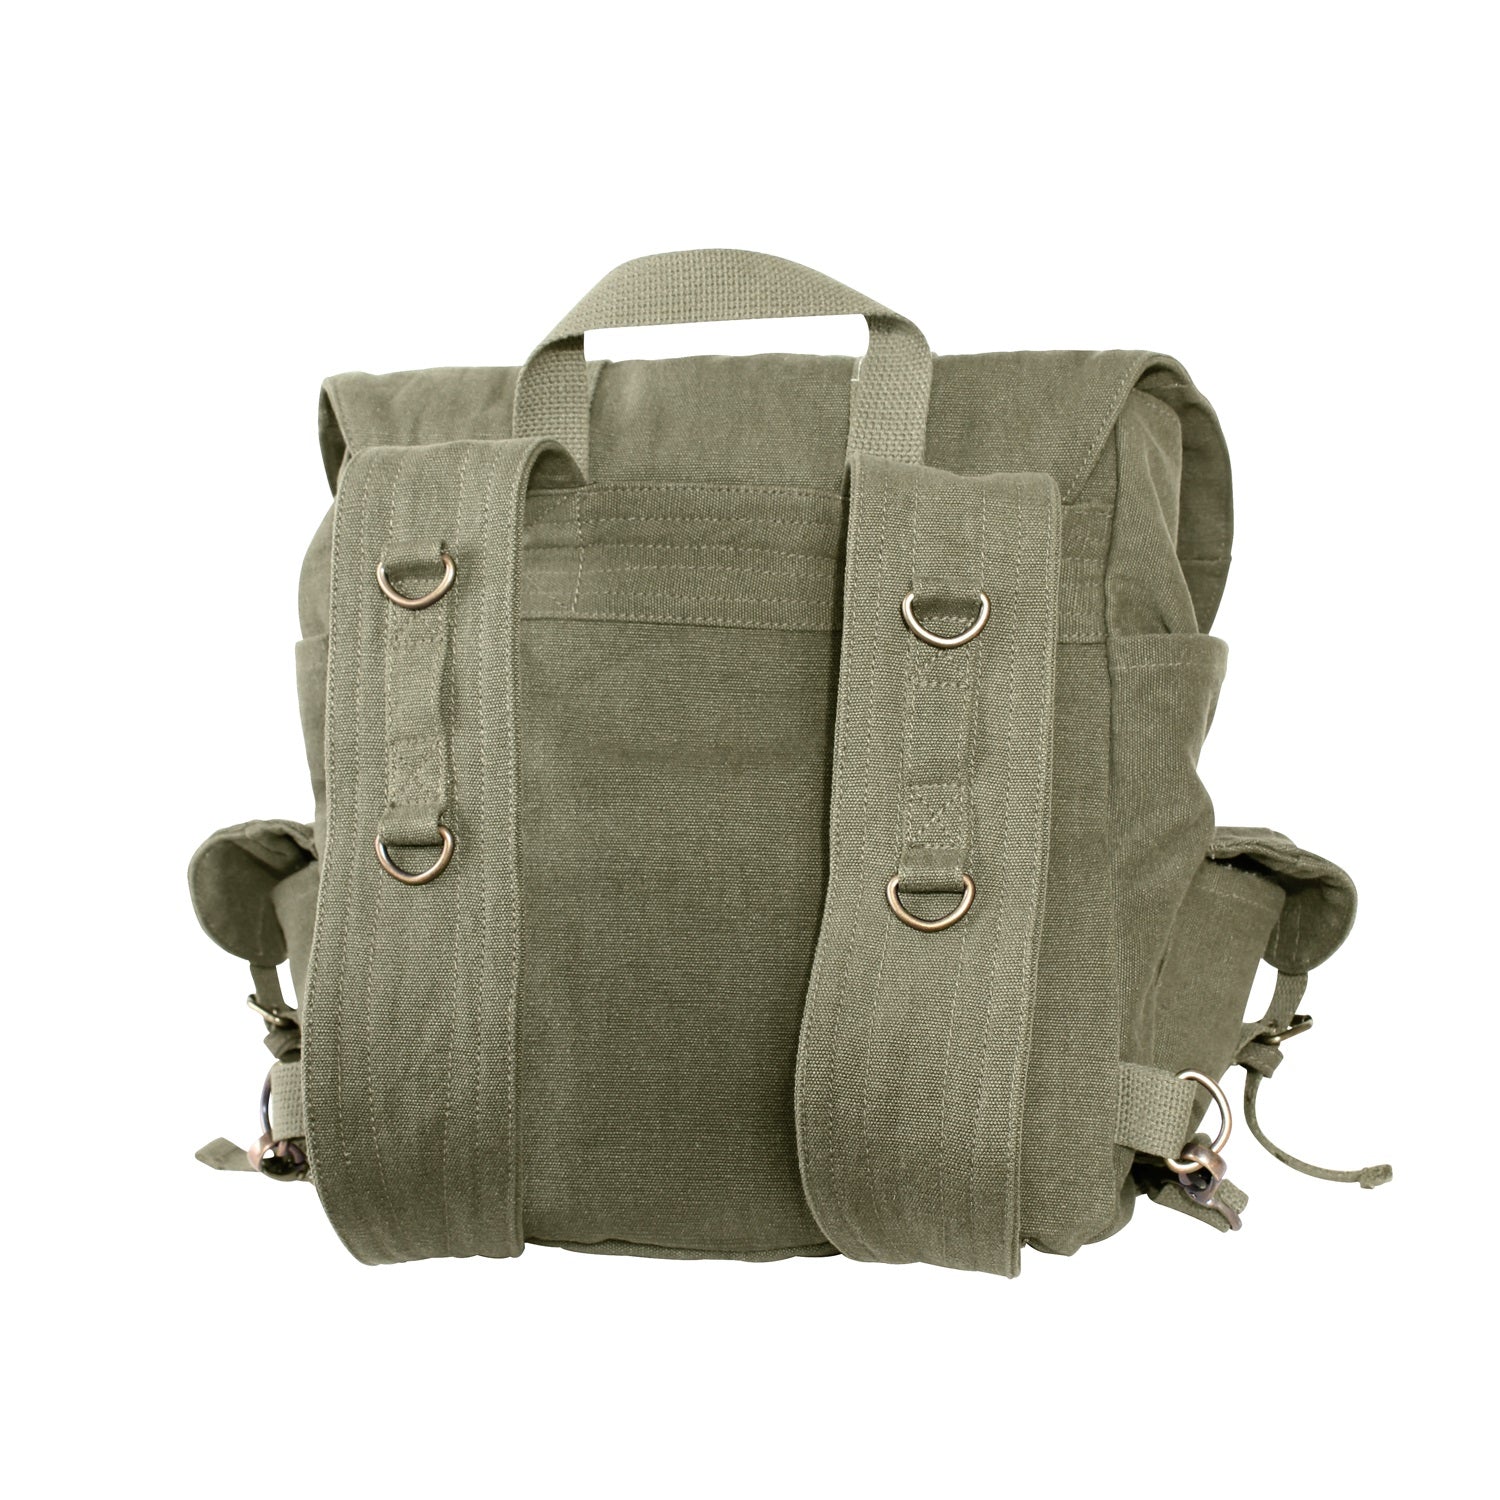 Rothco Compact Weekender Backpack With Cross